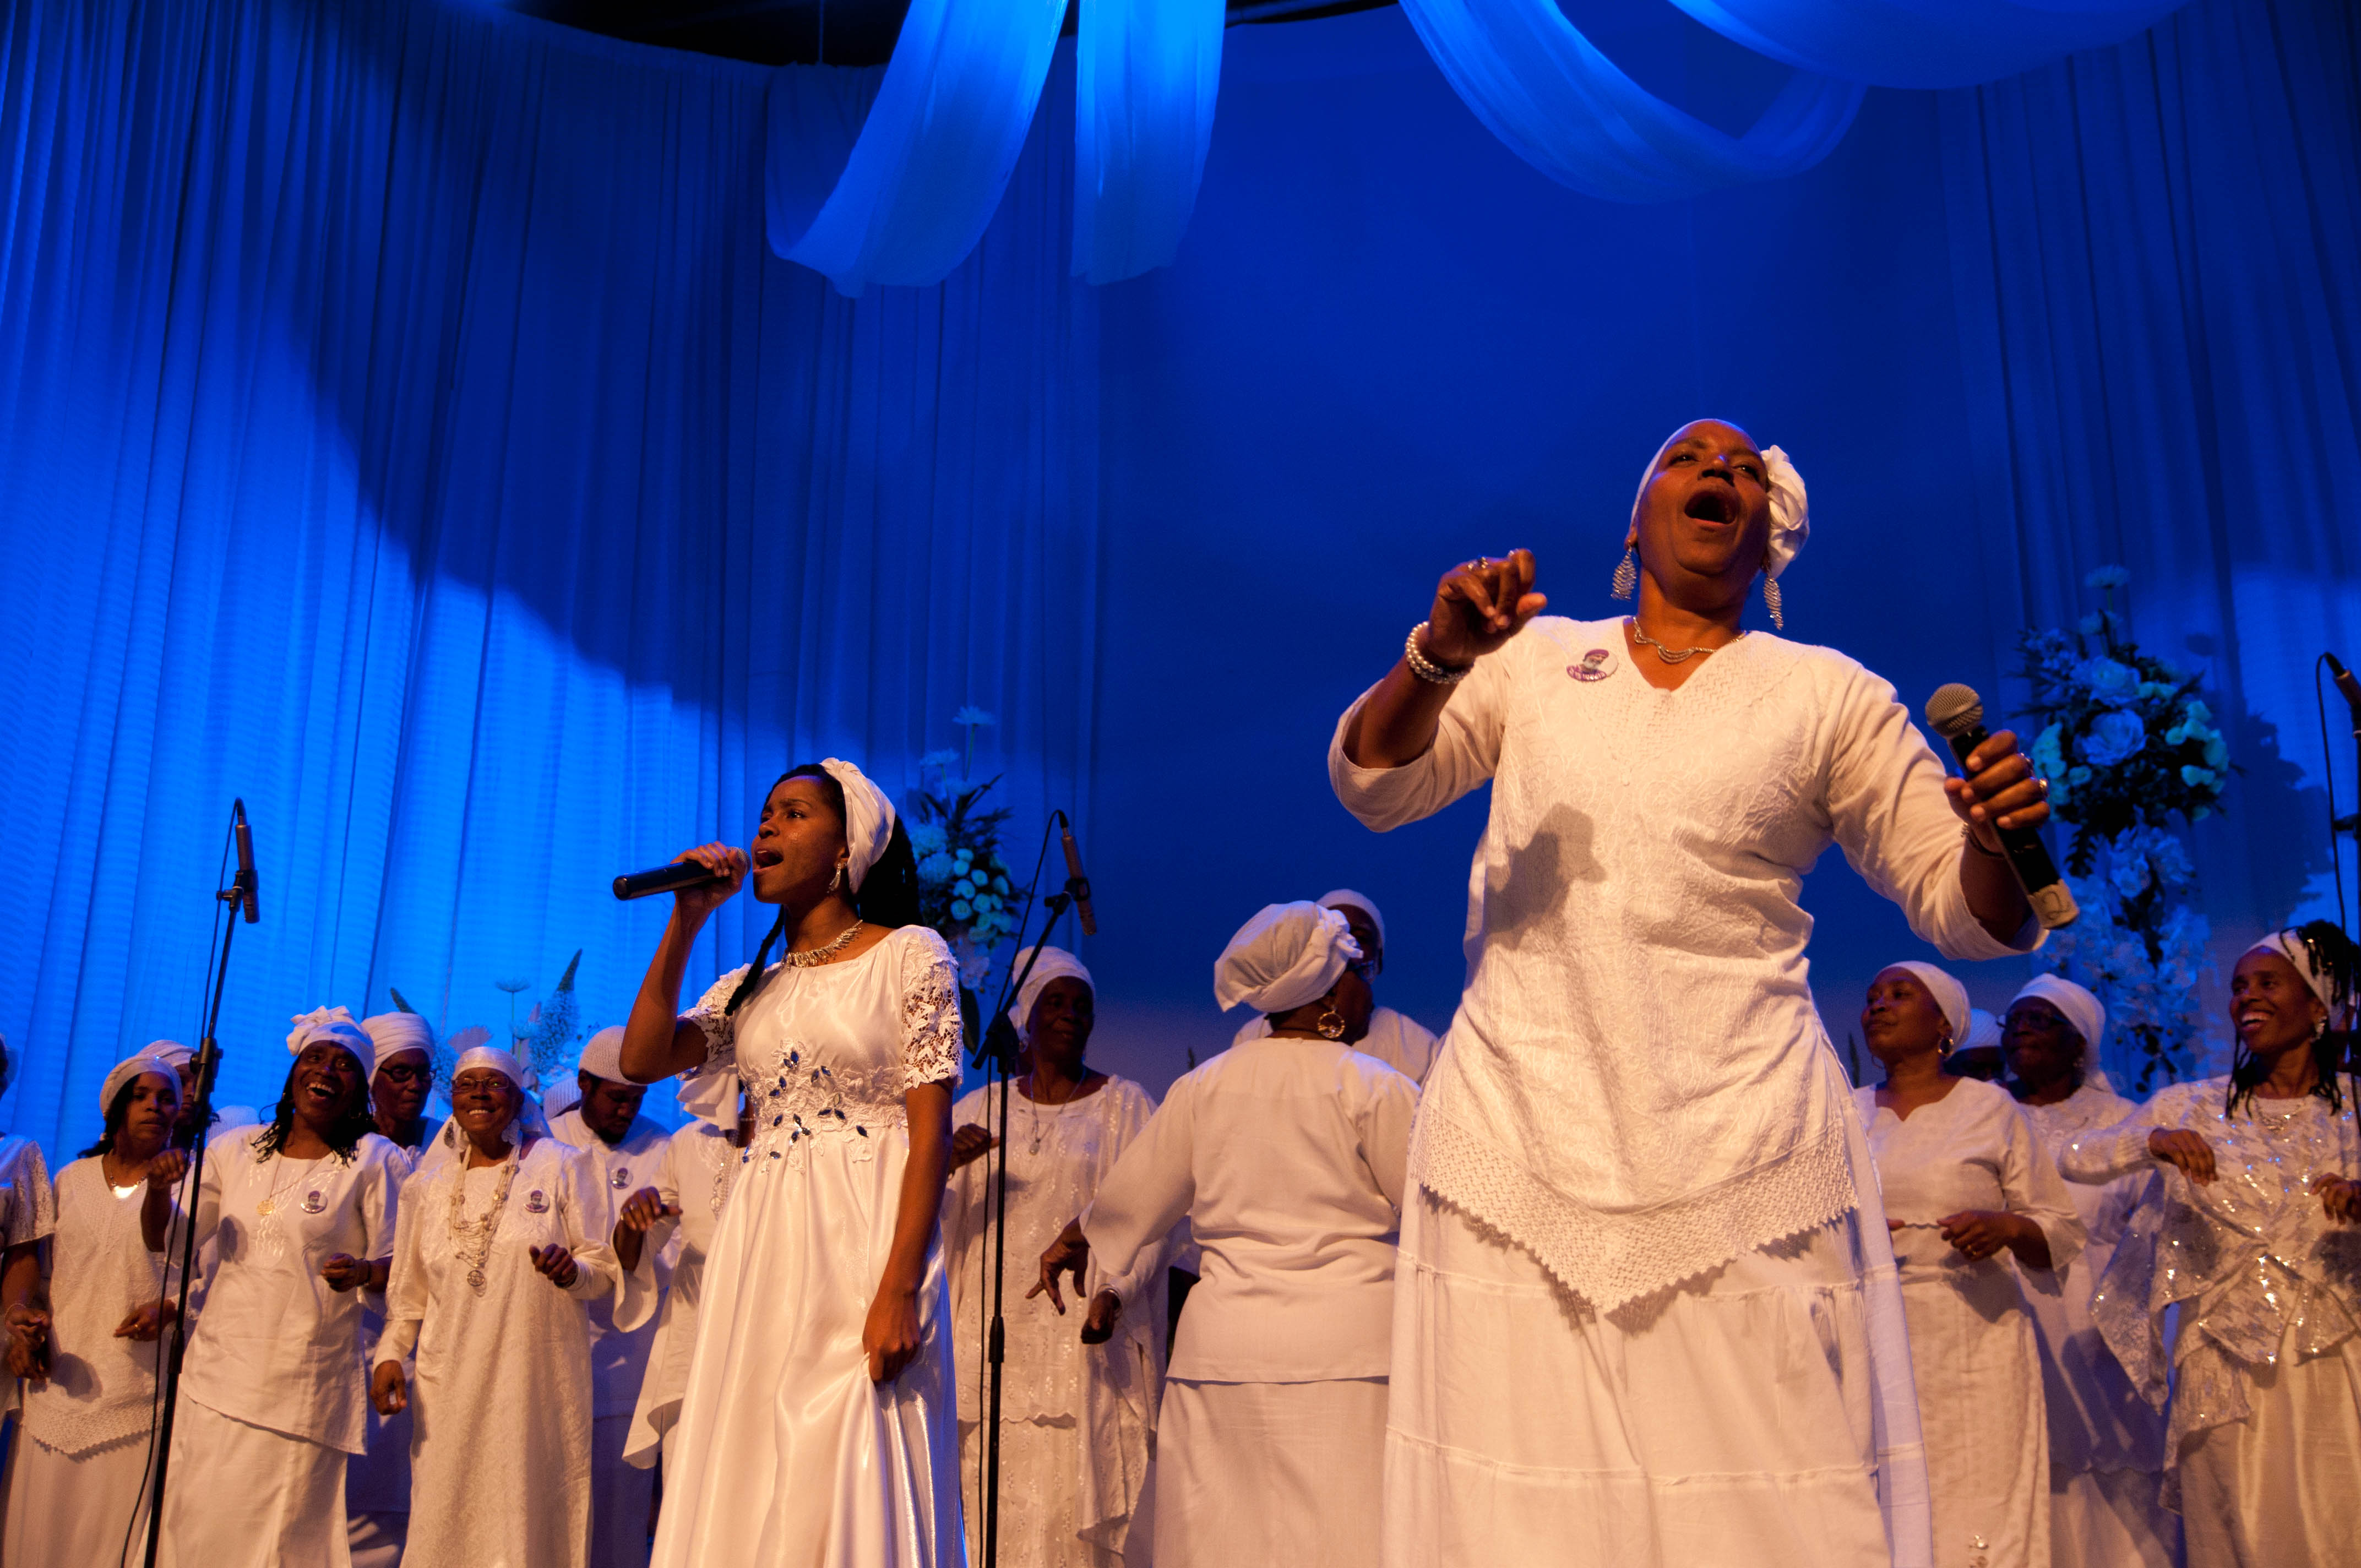 With song and dance, African Hebrew Israelites honor their departed leader